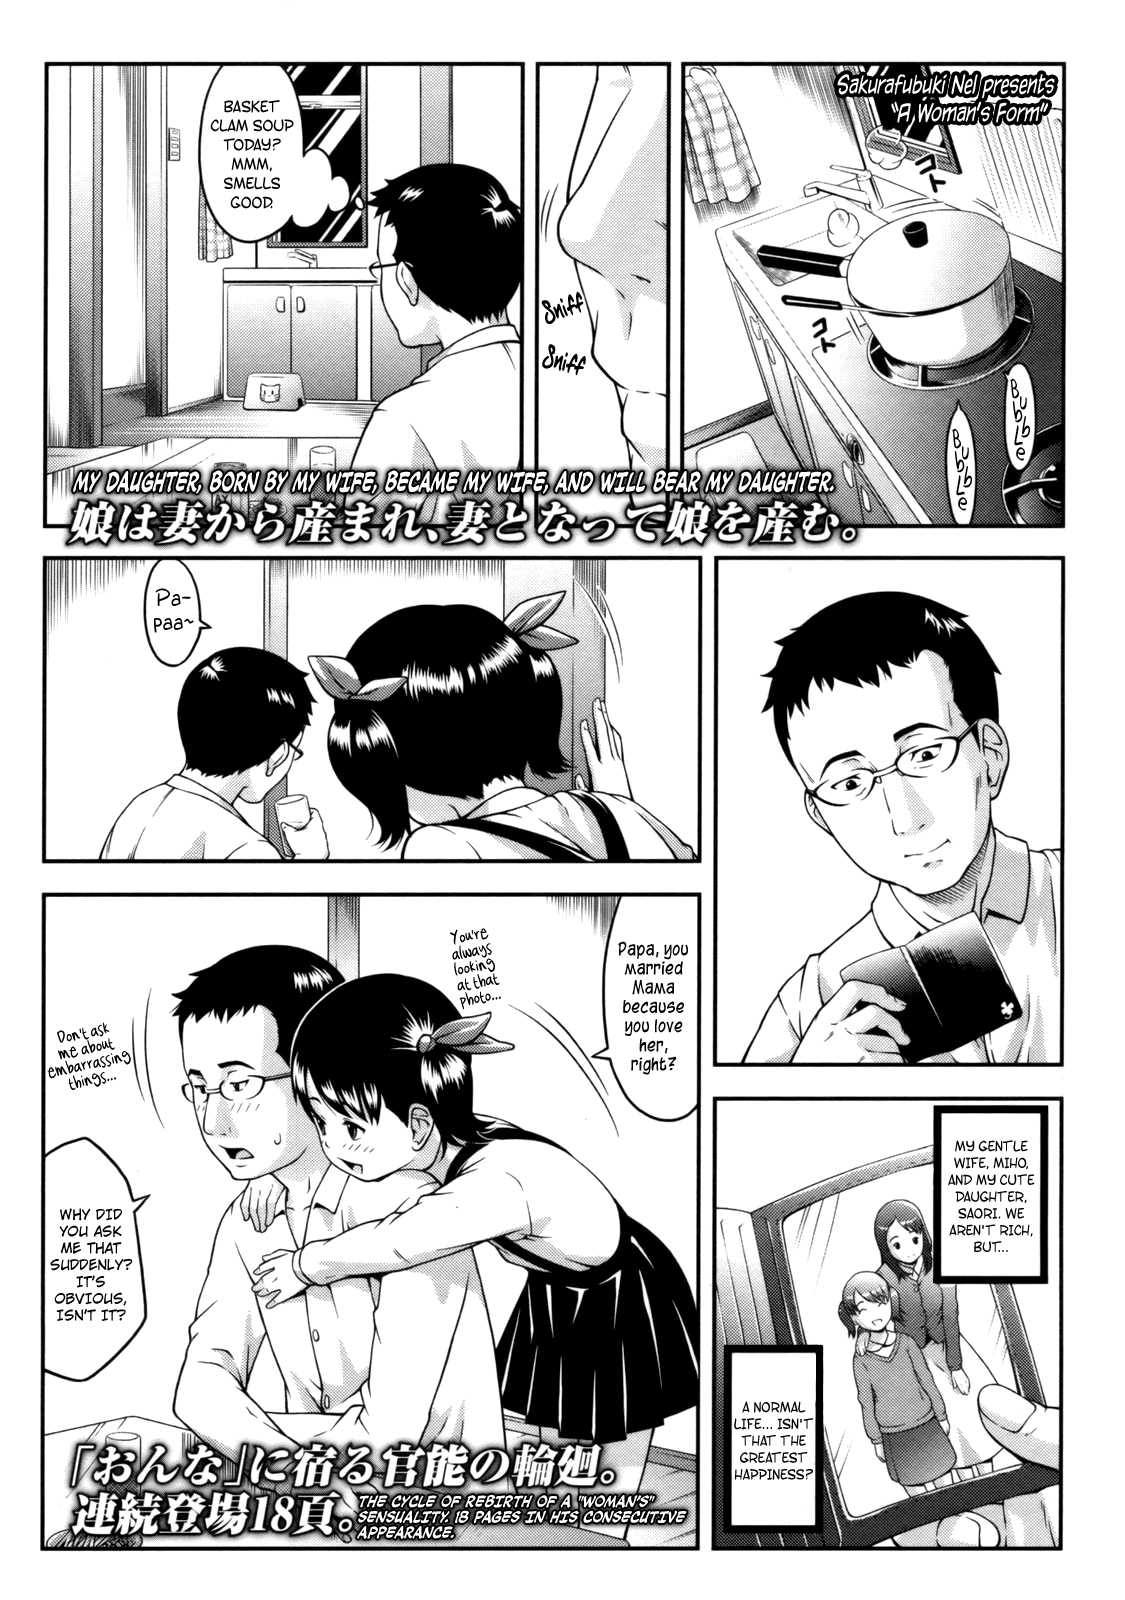 Reading A Womans Form Hentai 1 A Womans Form Oneshot Page 1 Hentai Manga Online At 3020